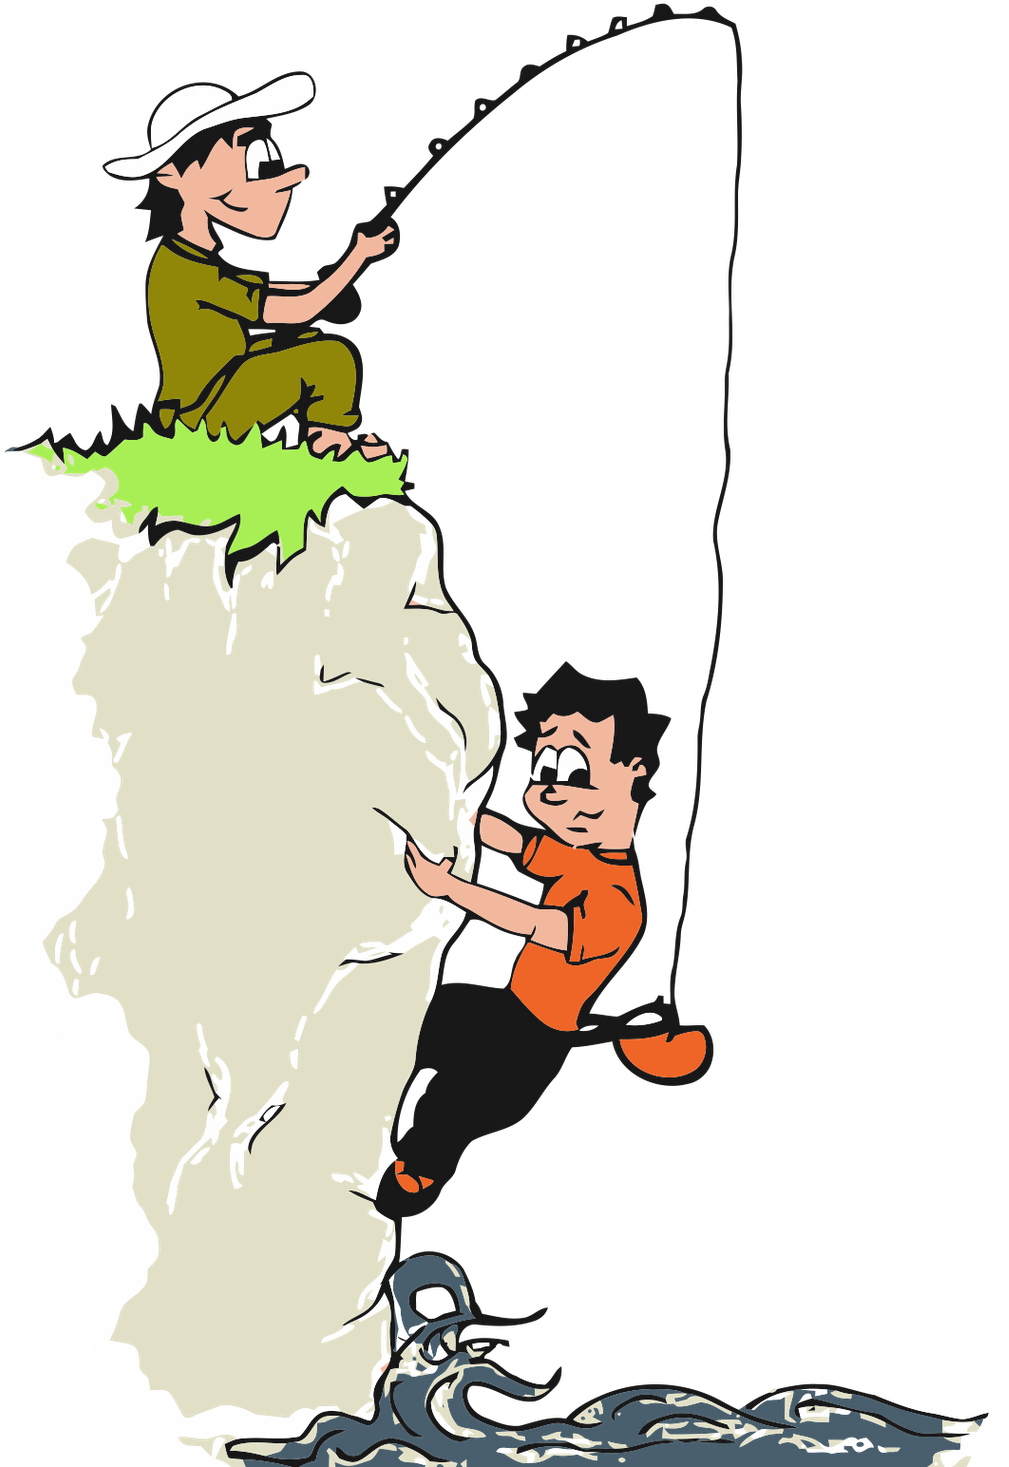 Download This Climbing Vector Design For Your T-shirt - Cartoon (1140x1600)